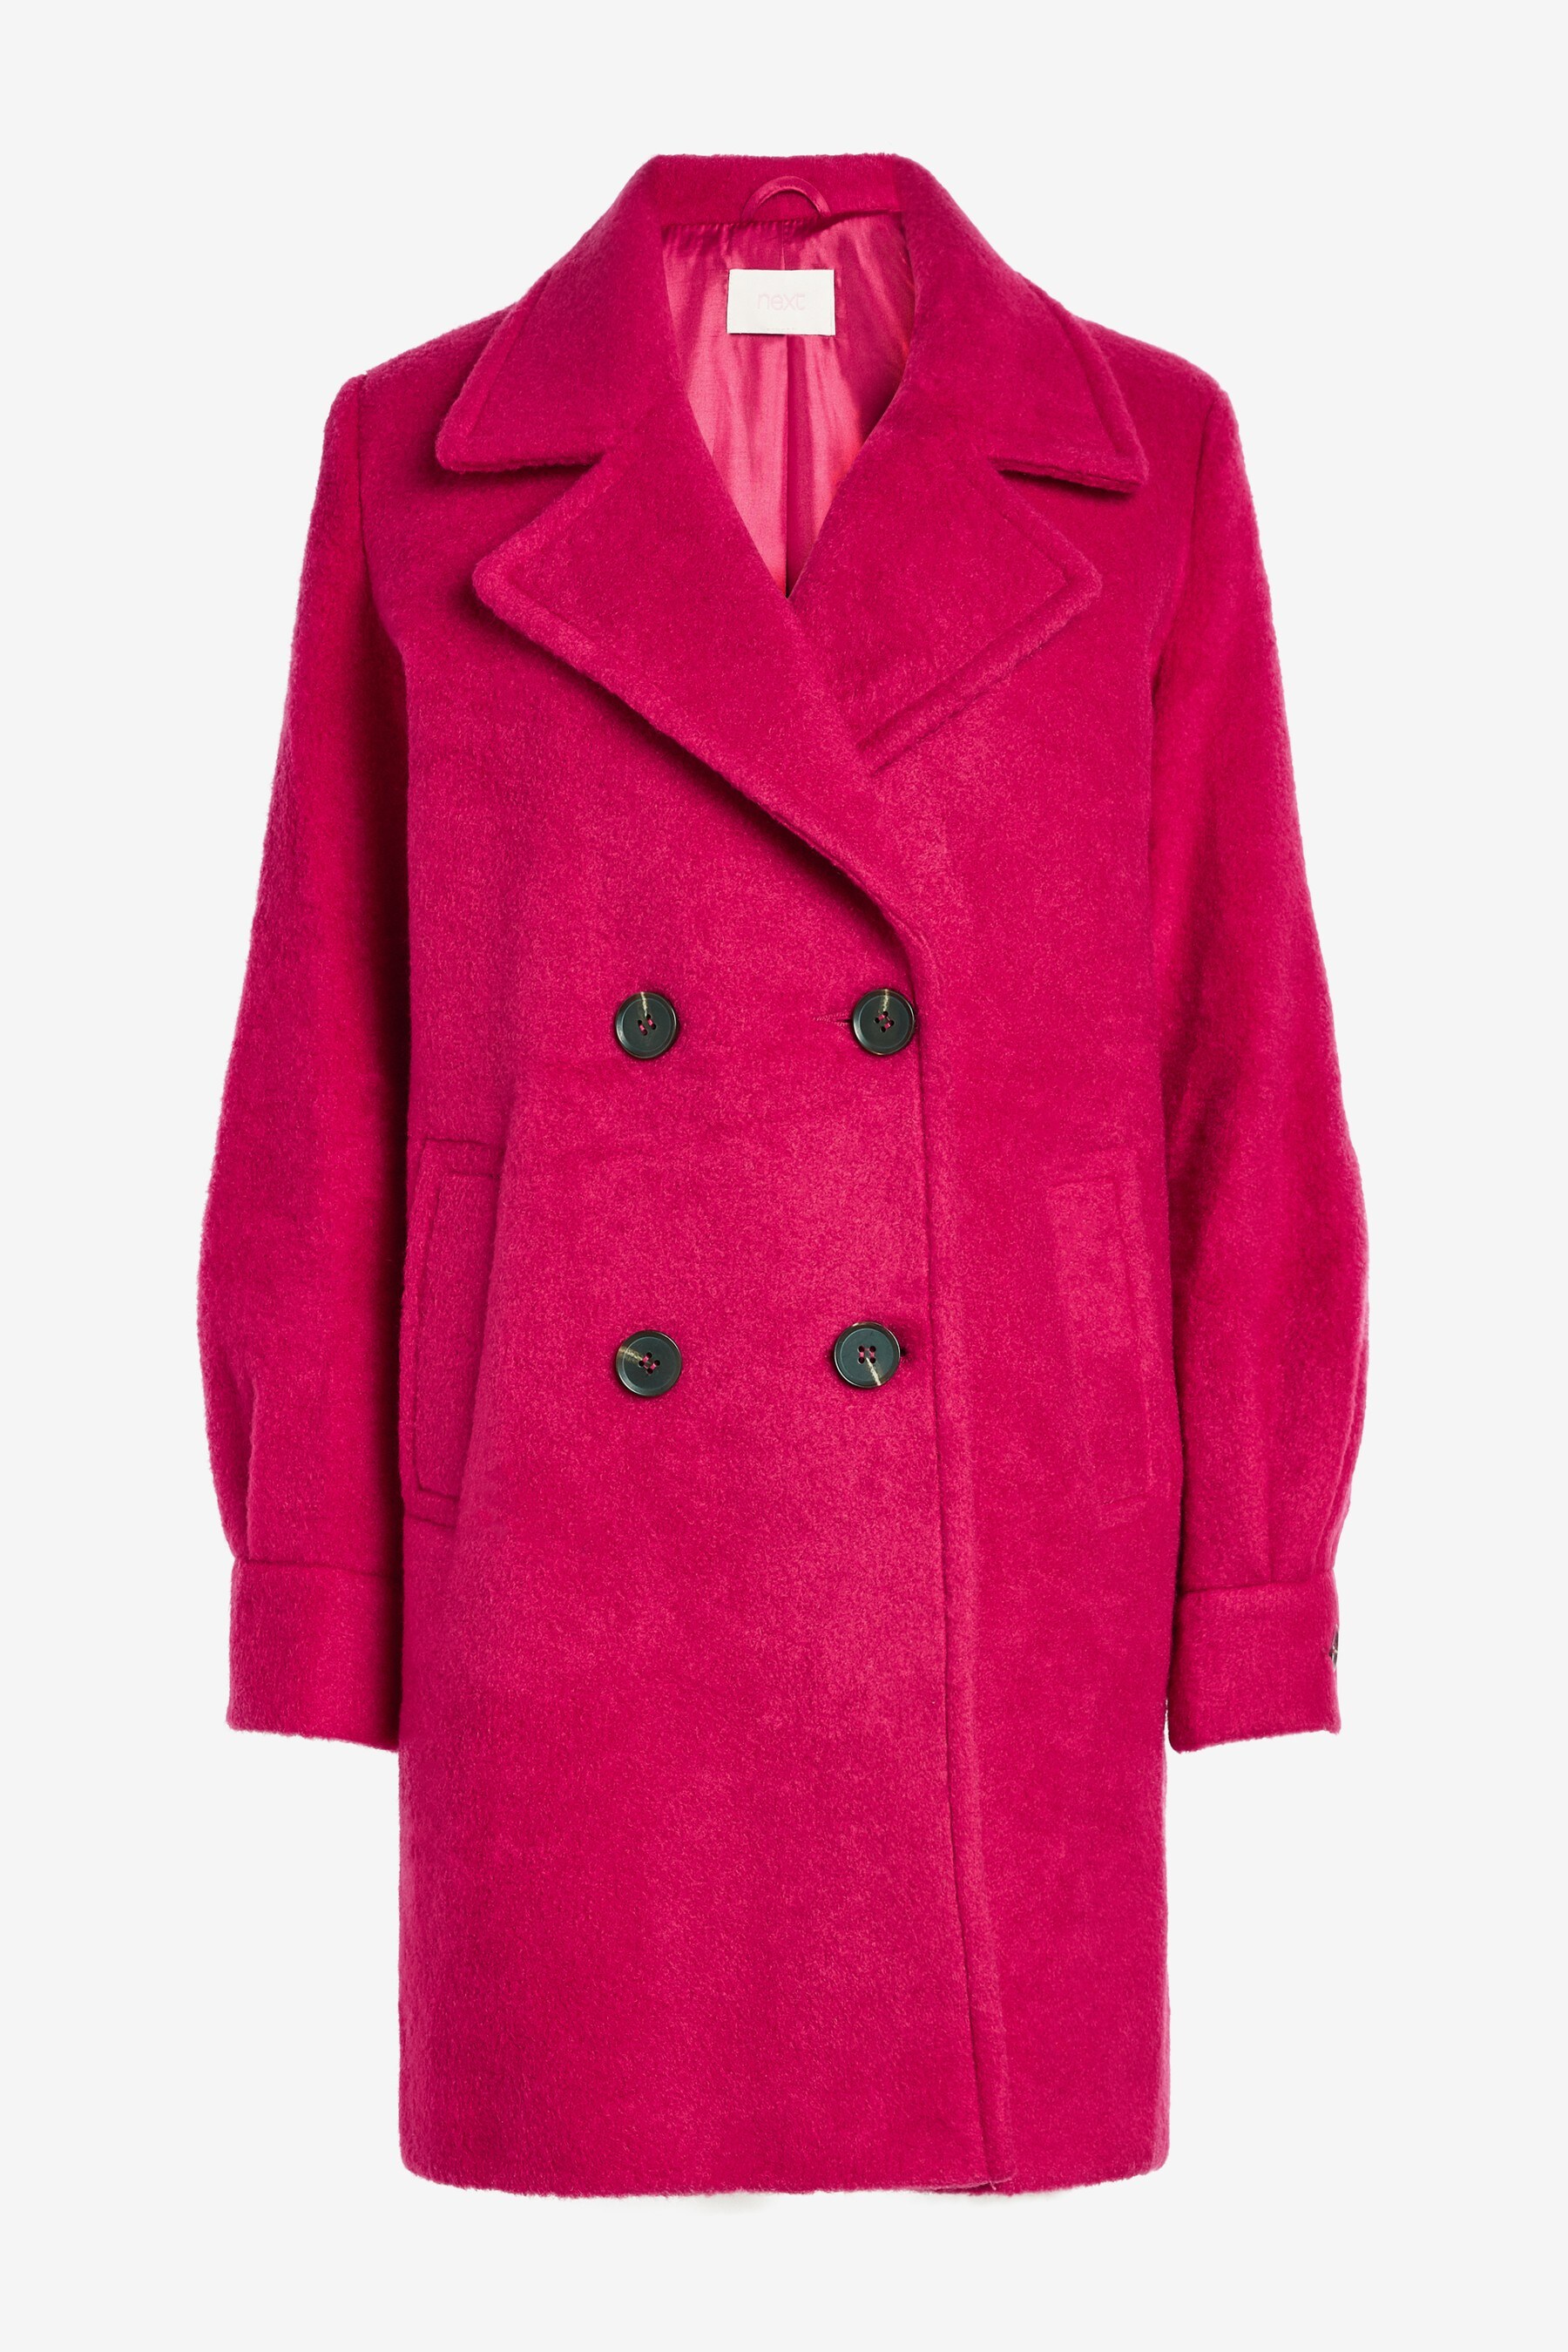 Buy Pink Soft Tailored Coat from the Next UK online shop